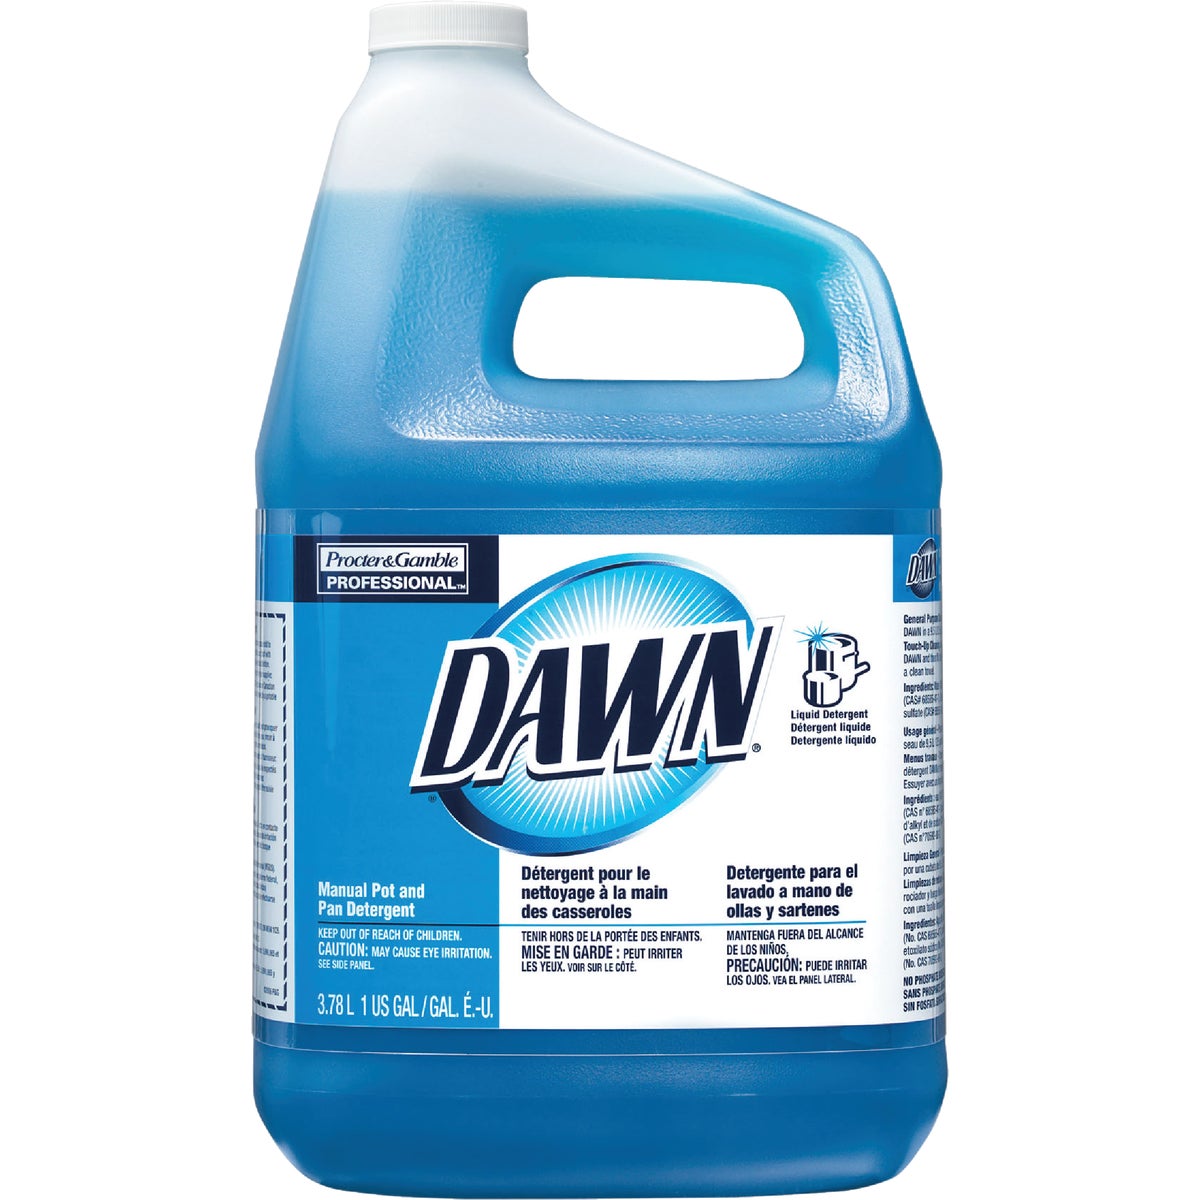 Dawn Professional 1 Gal. Double Cleaning Power Pot & Pan Dish Soap (4 Pack)